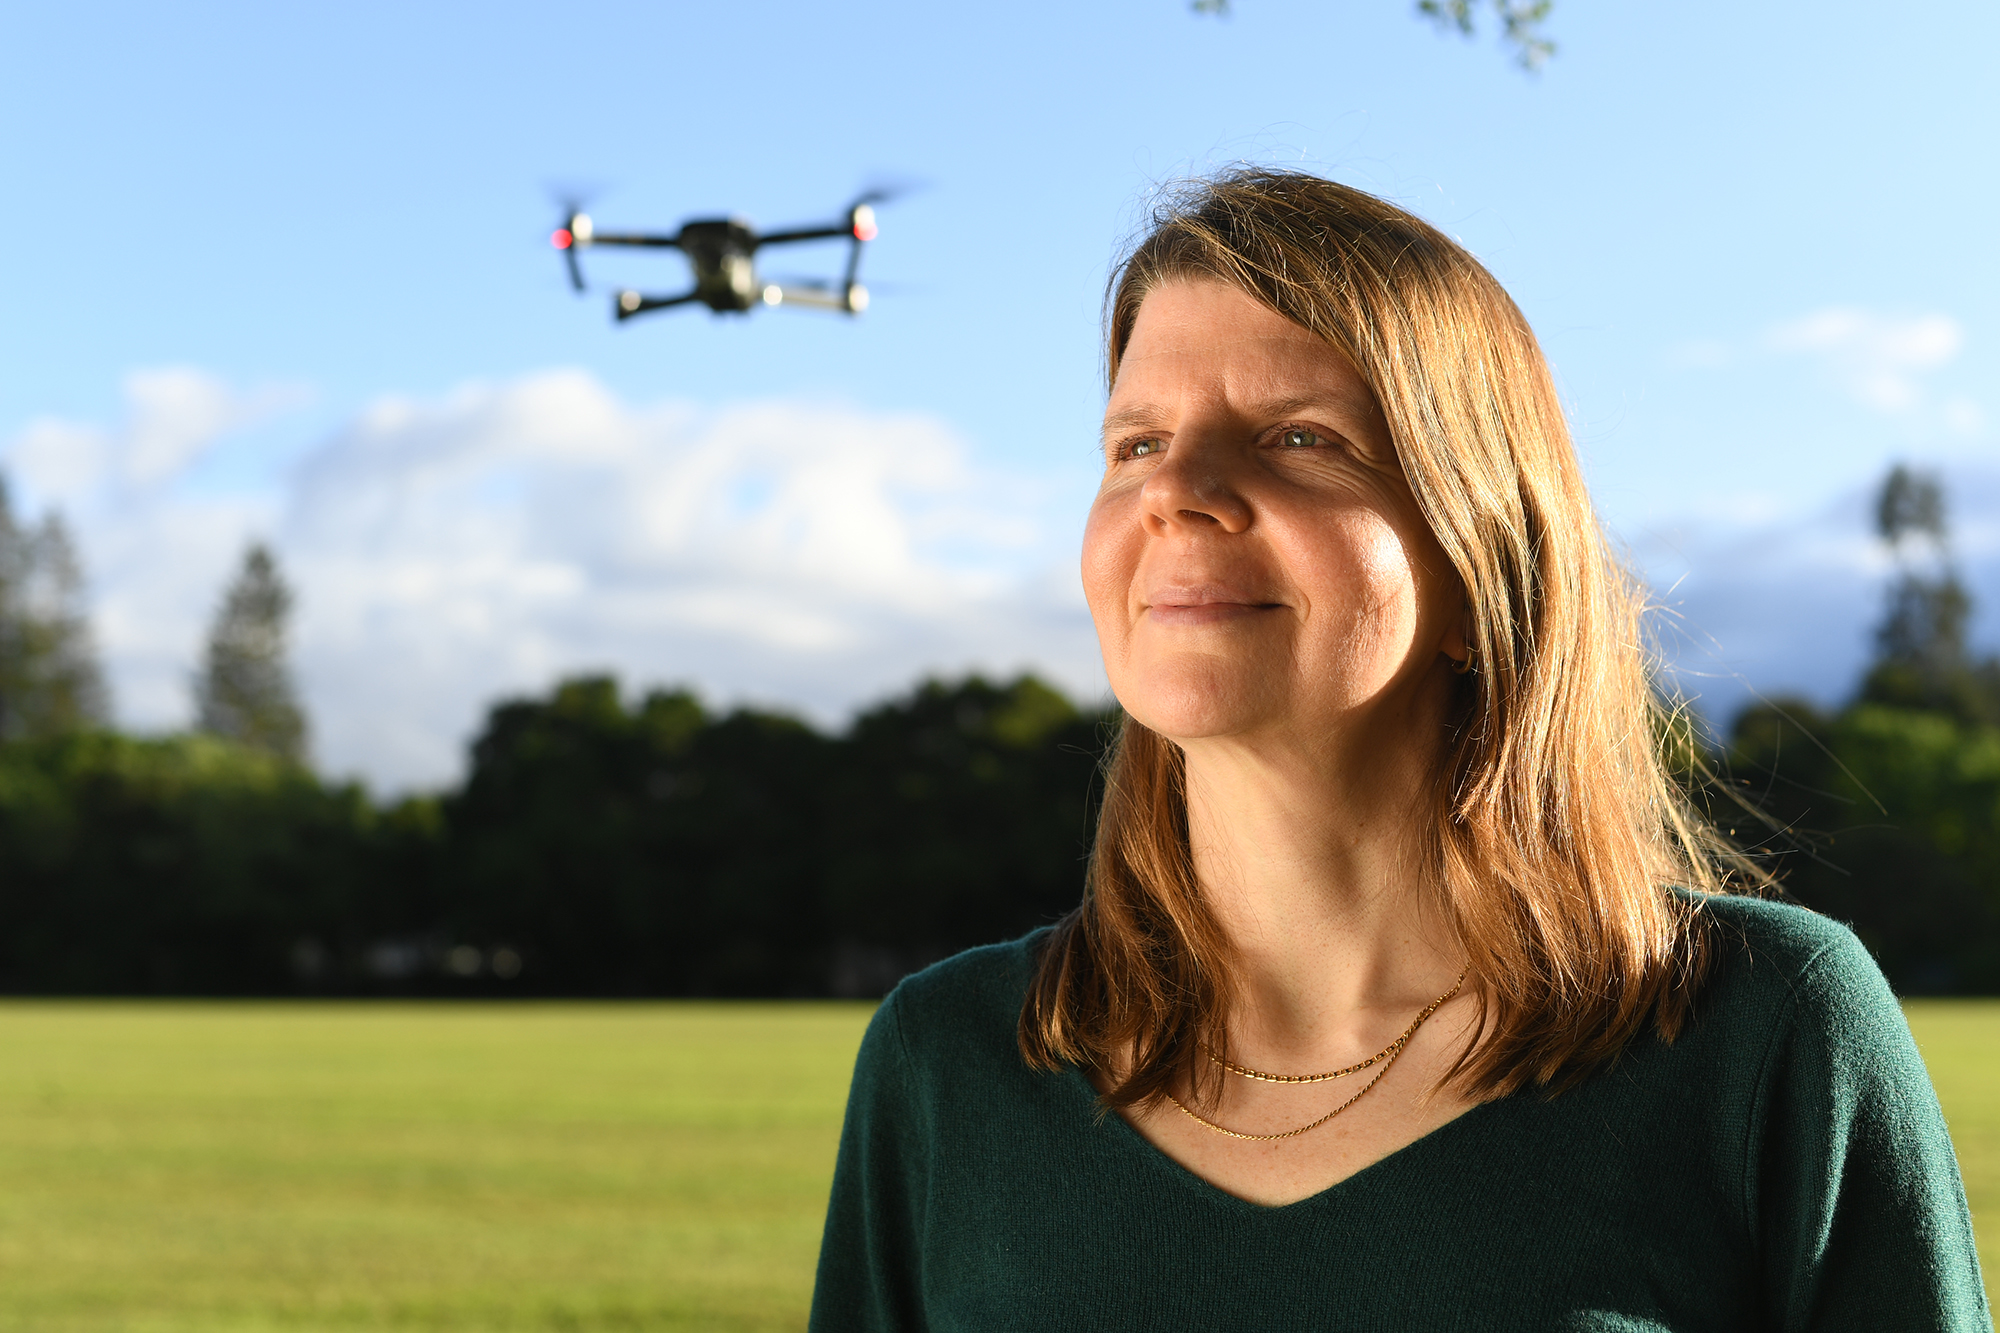 woman looking off into distance with drone behind her